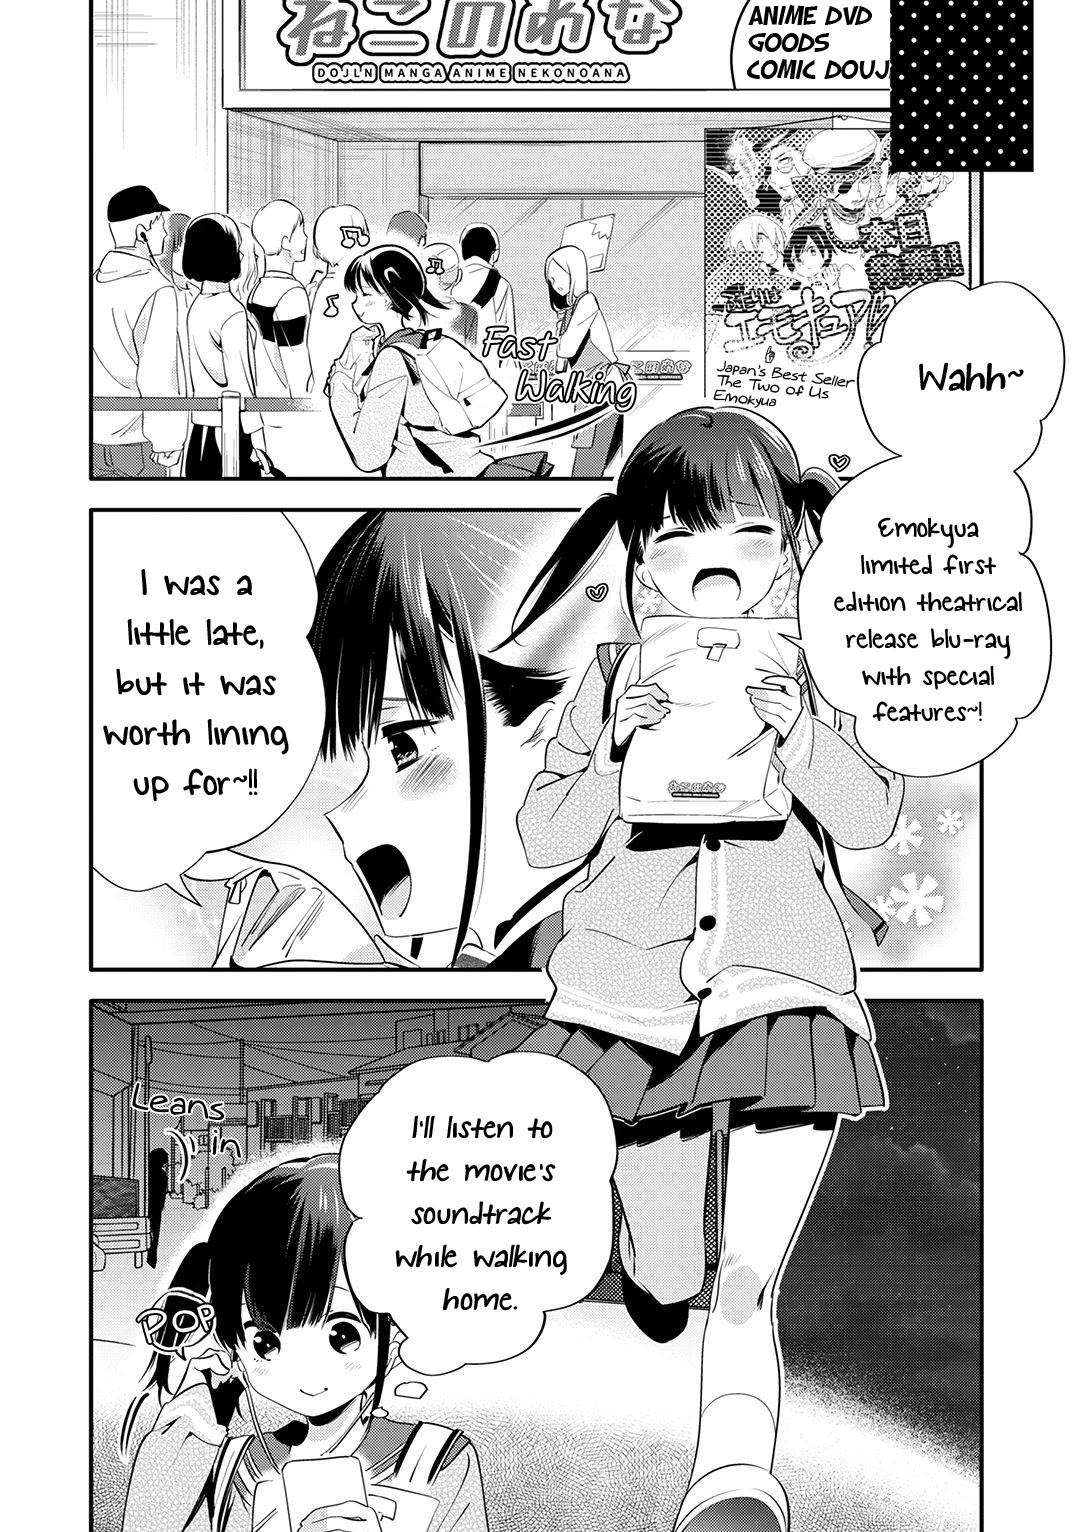 A Story About An Old Man Teaches Bad Things To A School Girl - Page 3